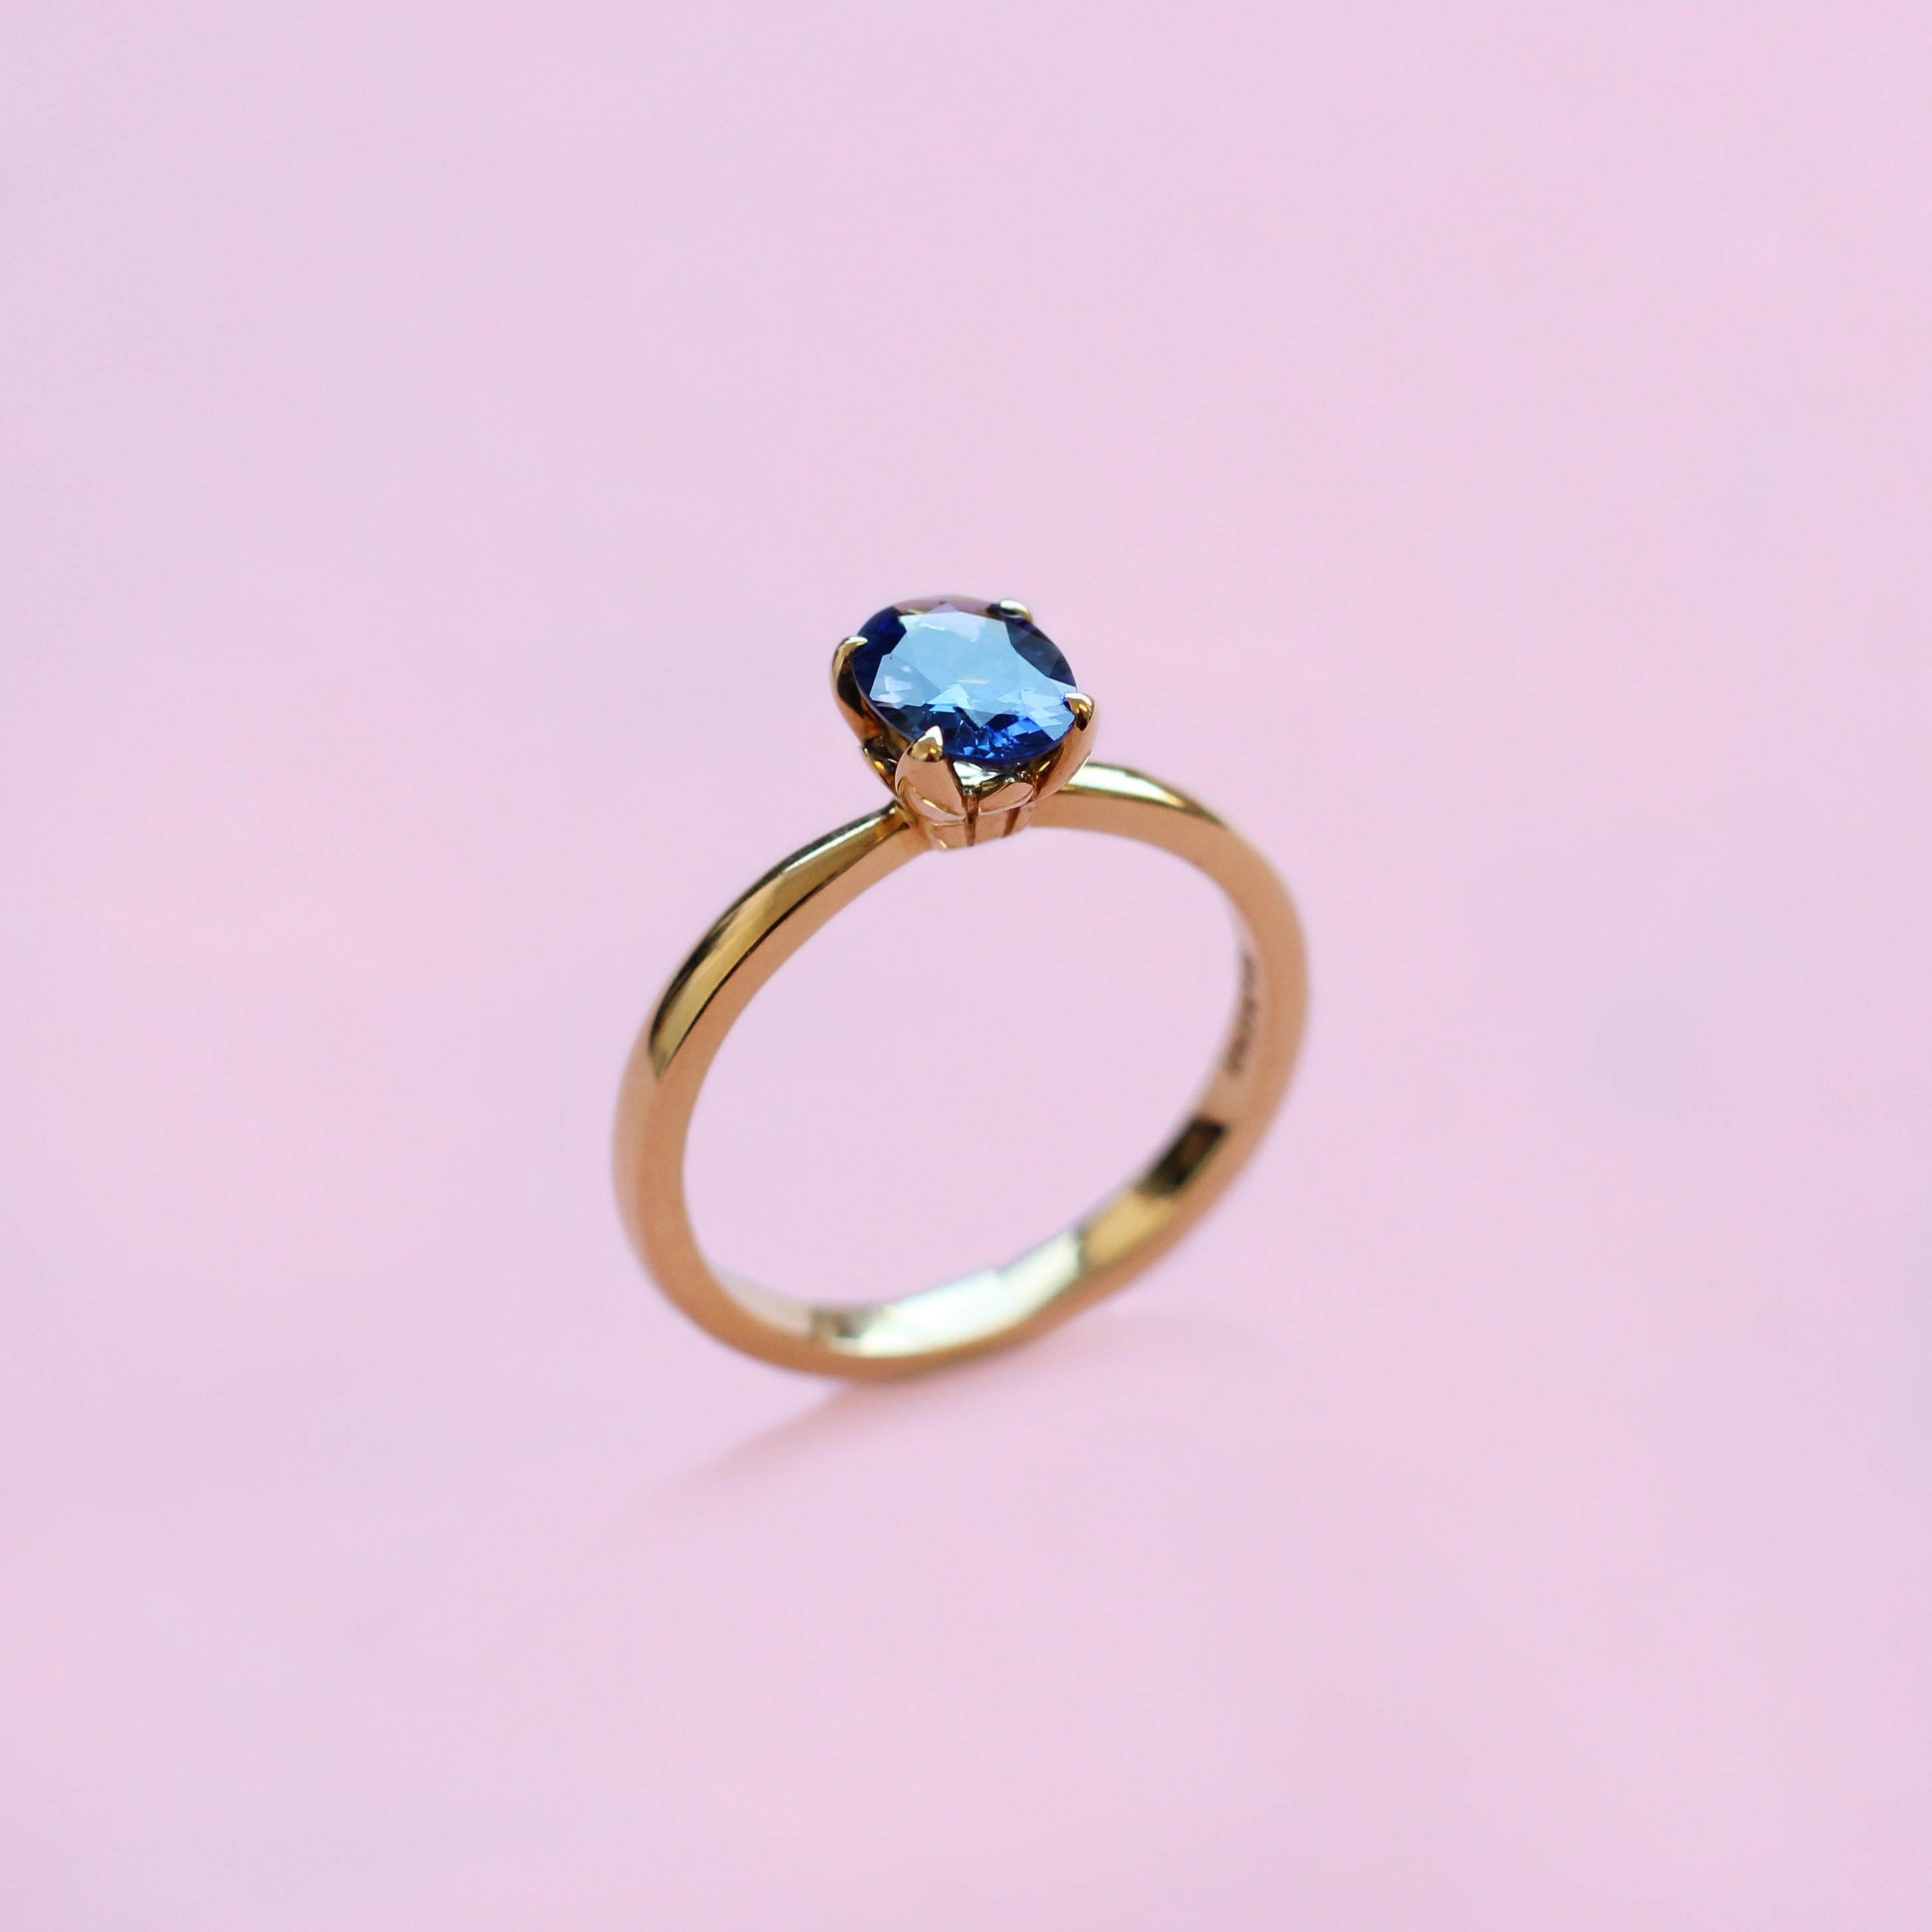 For Sale:  Blue Sapphire Solitaire Ring in 18 Karat Yellow Gold 3